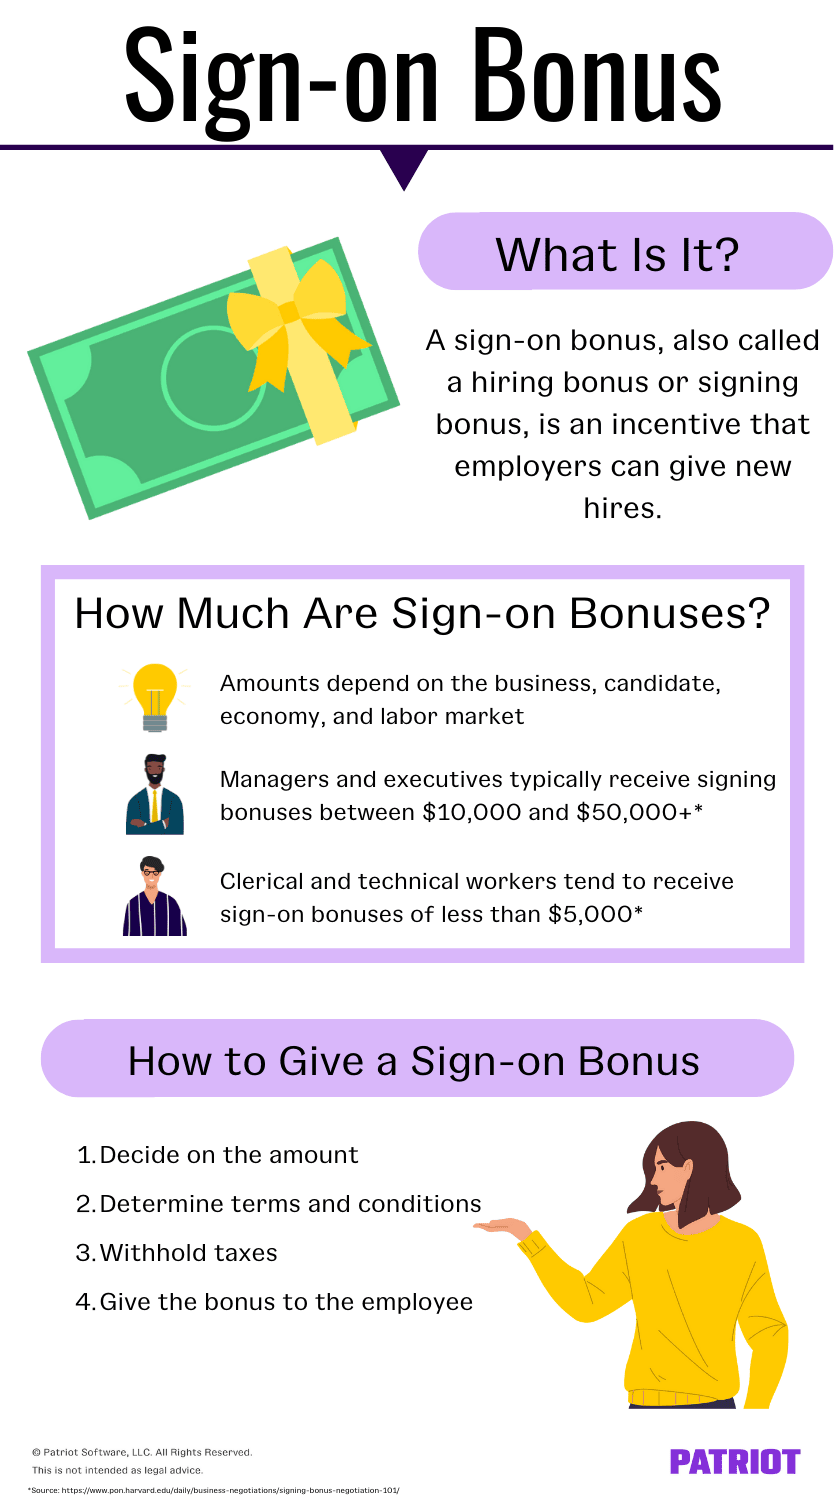 what is a sign-on bonus, how much is it, and how to give a sign-on bonus